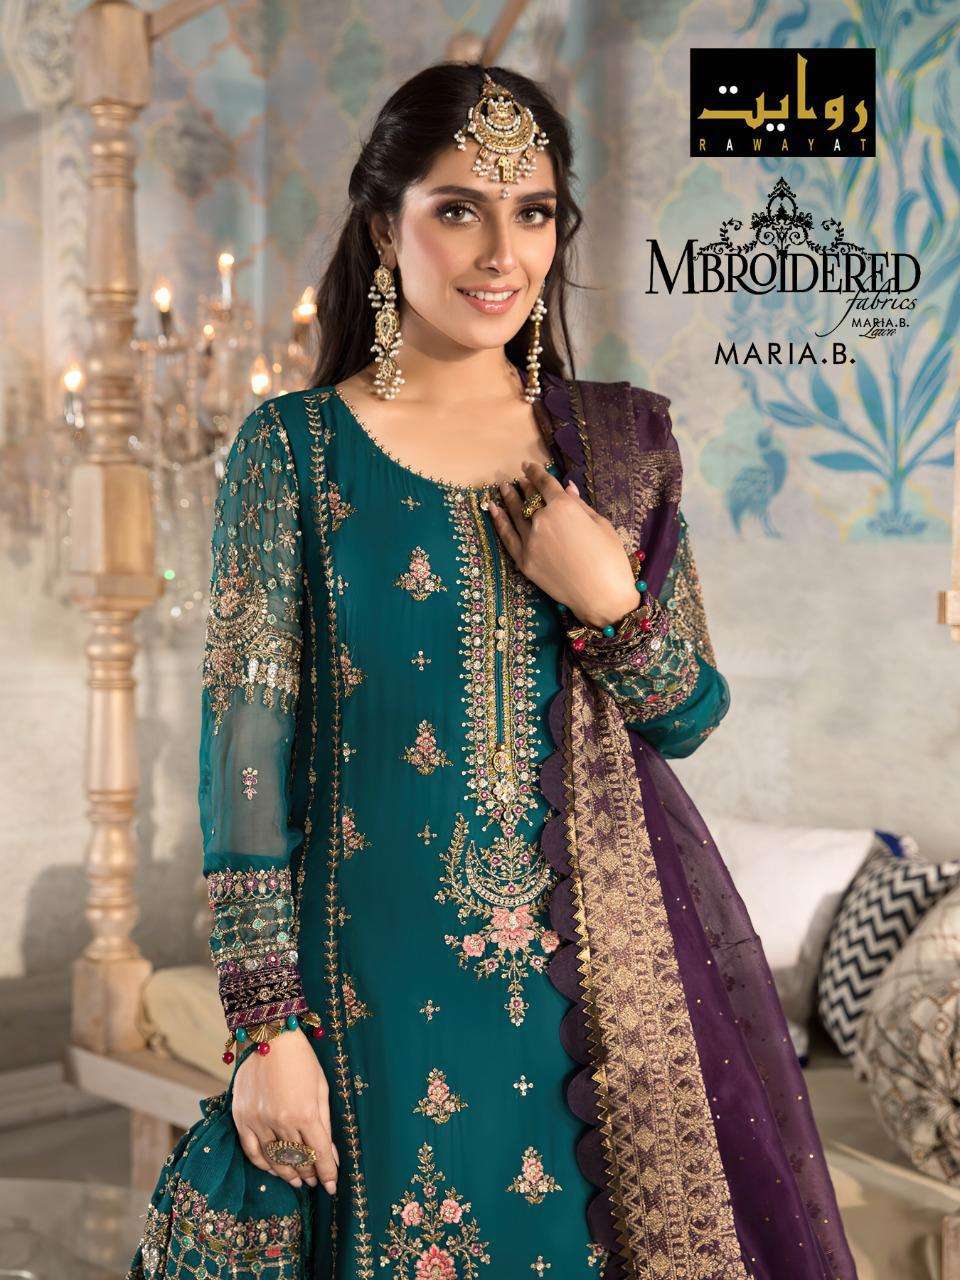 Rawayat Mbroidered Collection 2021 Georgette With Embroidery...